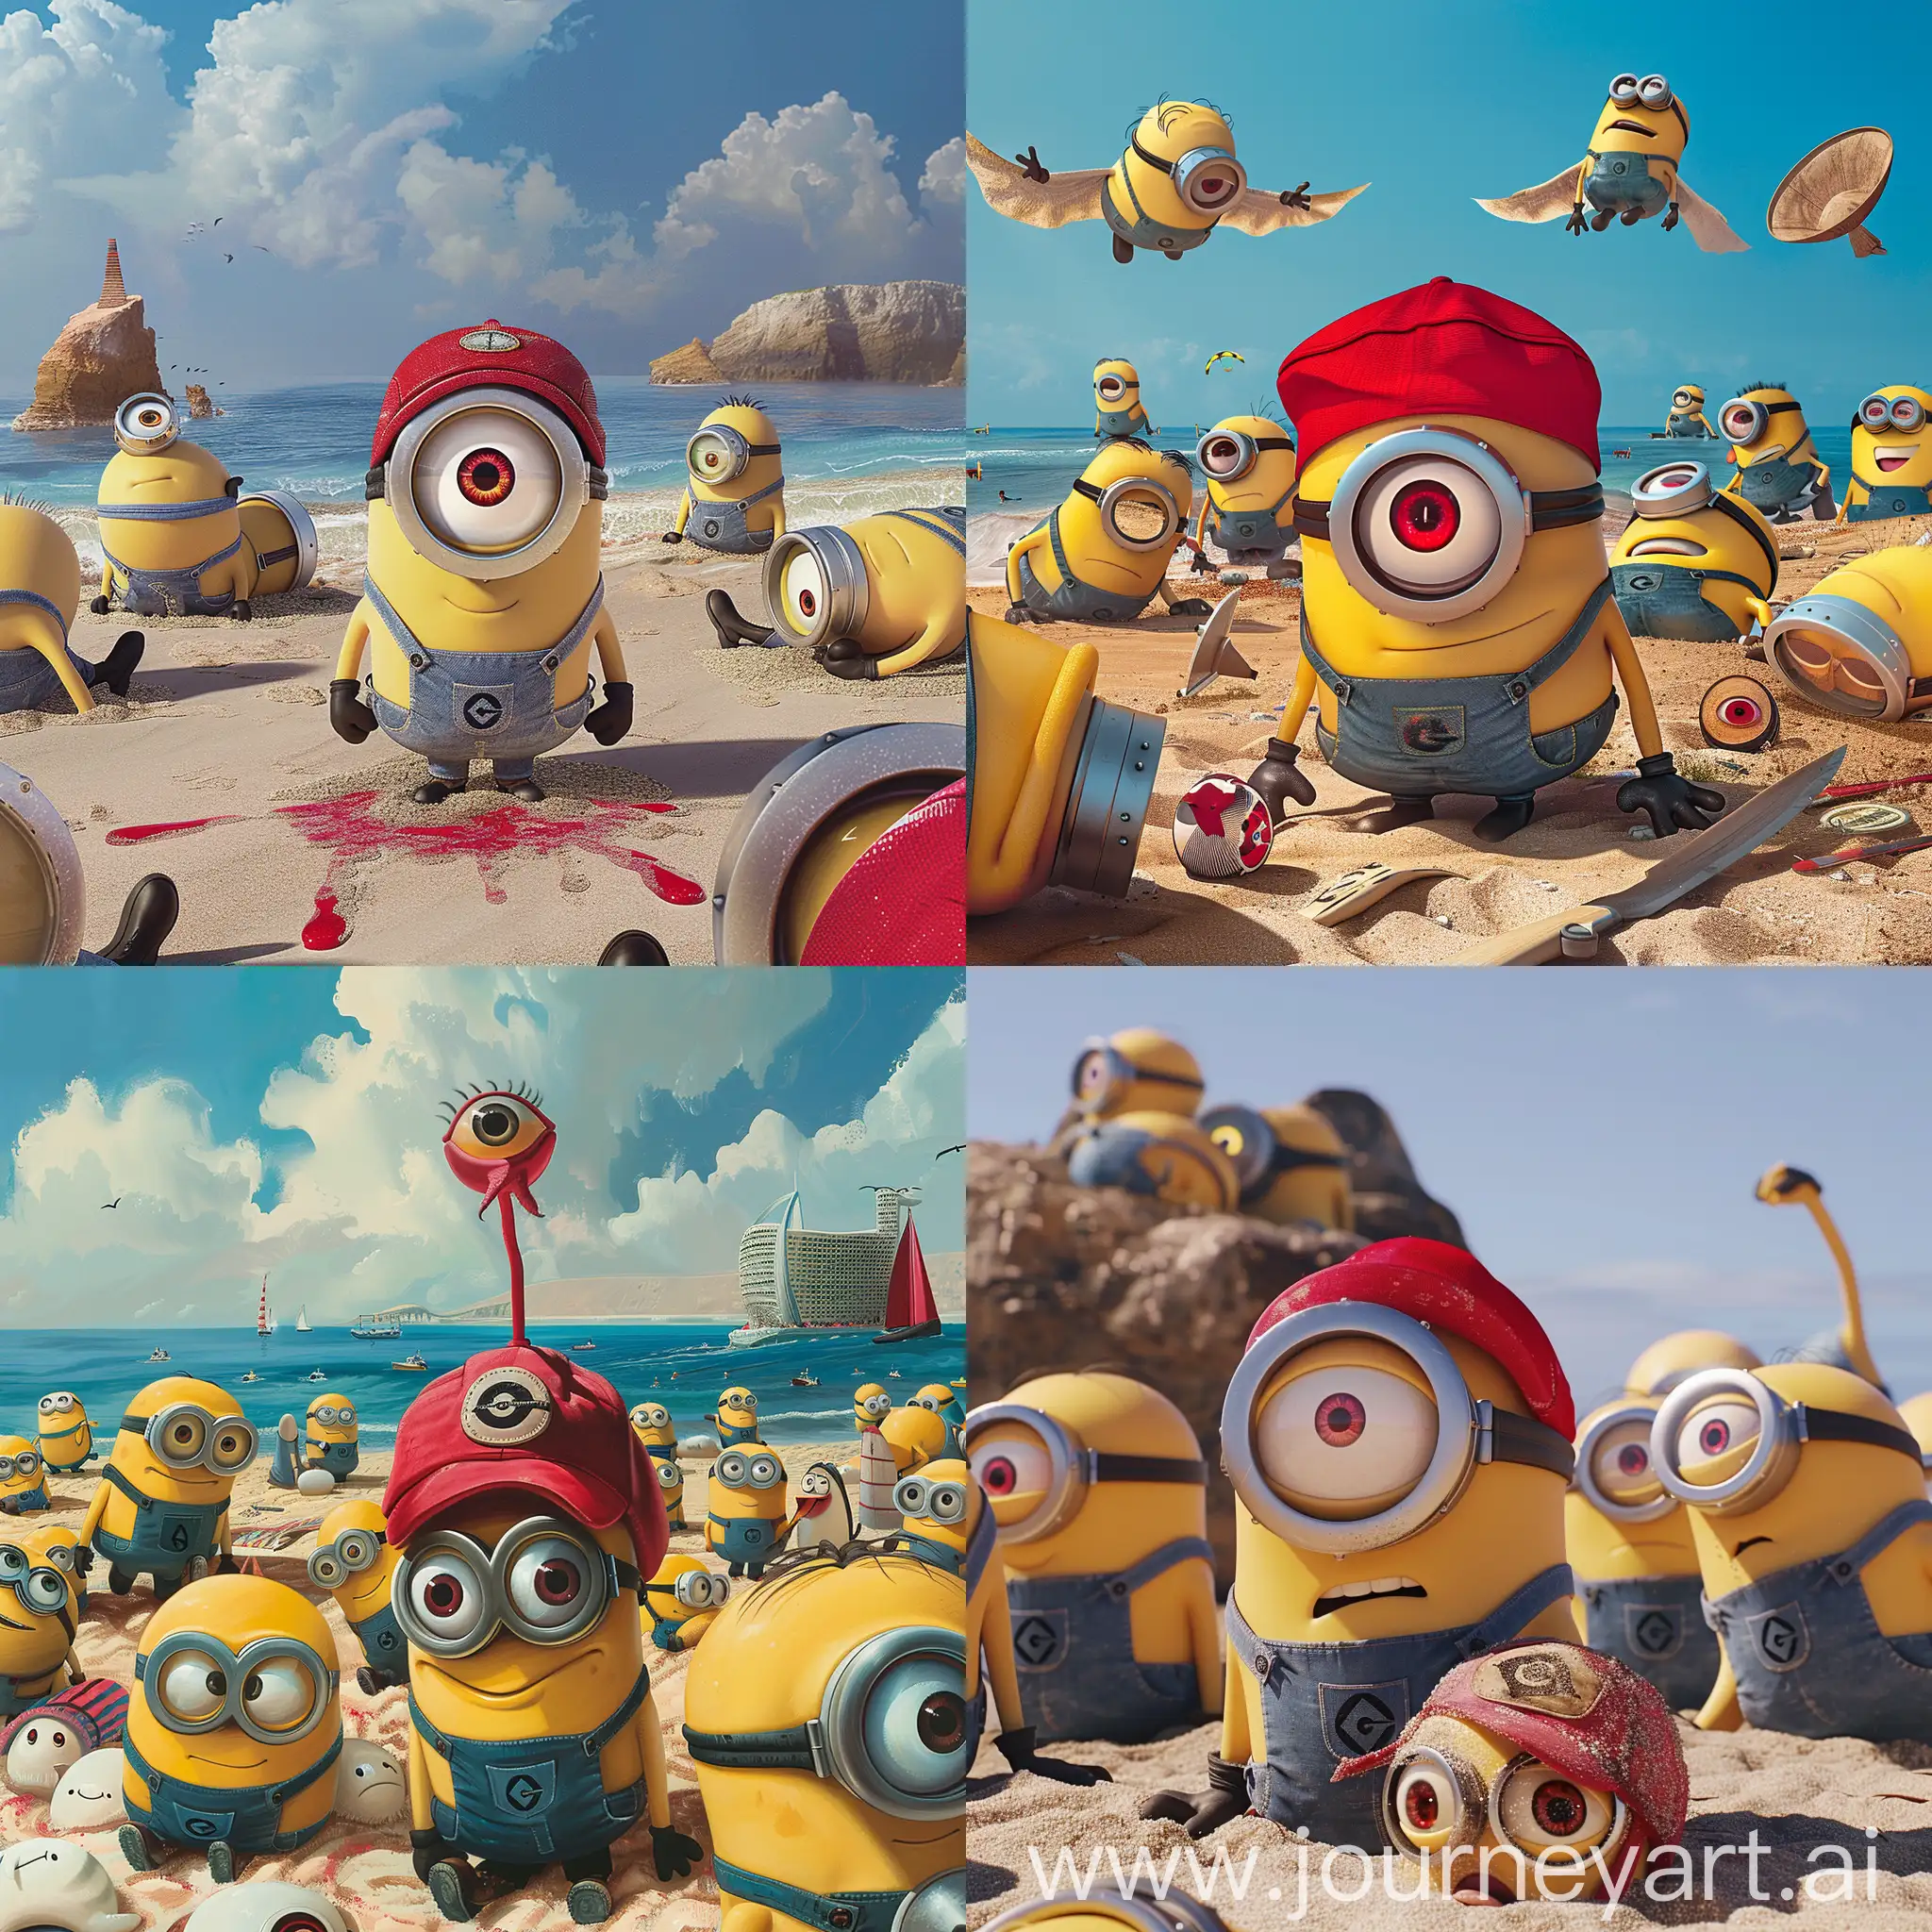 Minions-Relaxing-on-Beach-OneEyed-Minion-in-Red-Cap-Stands-Out